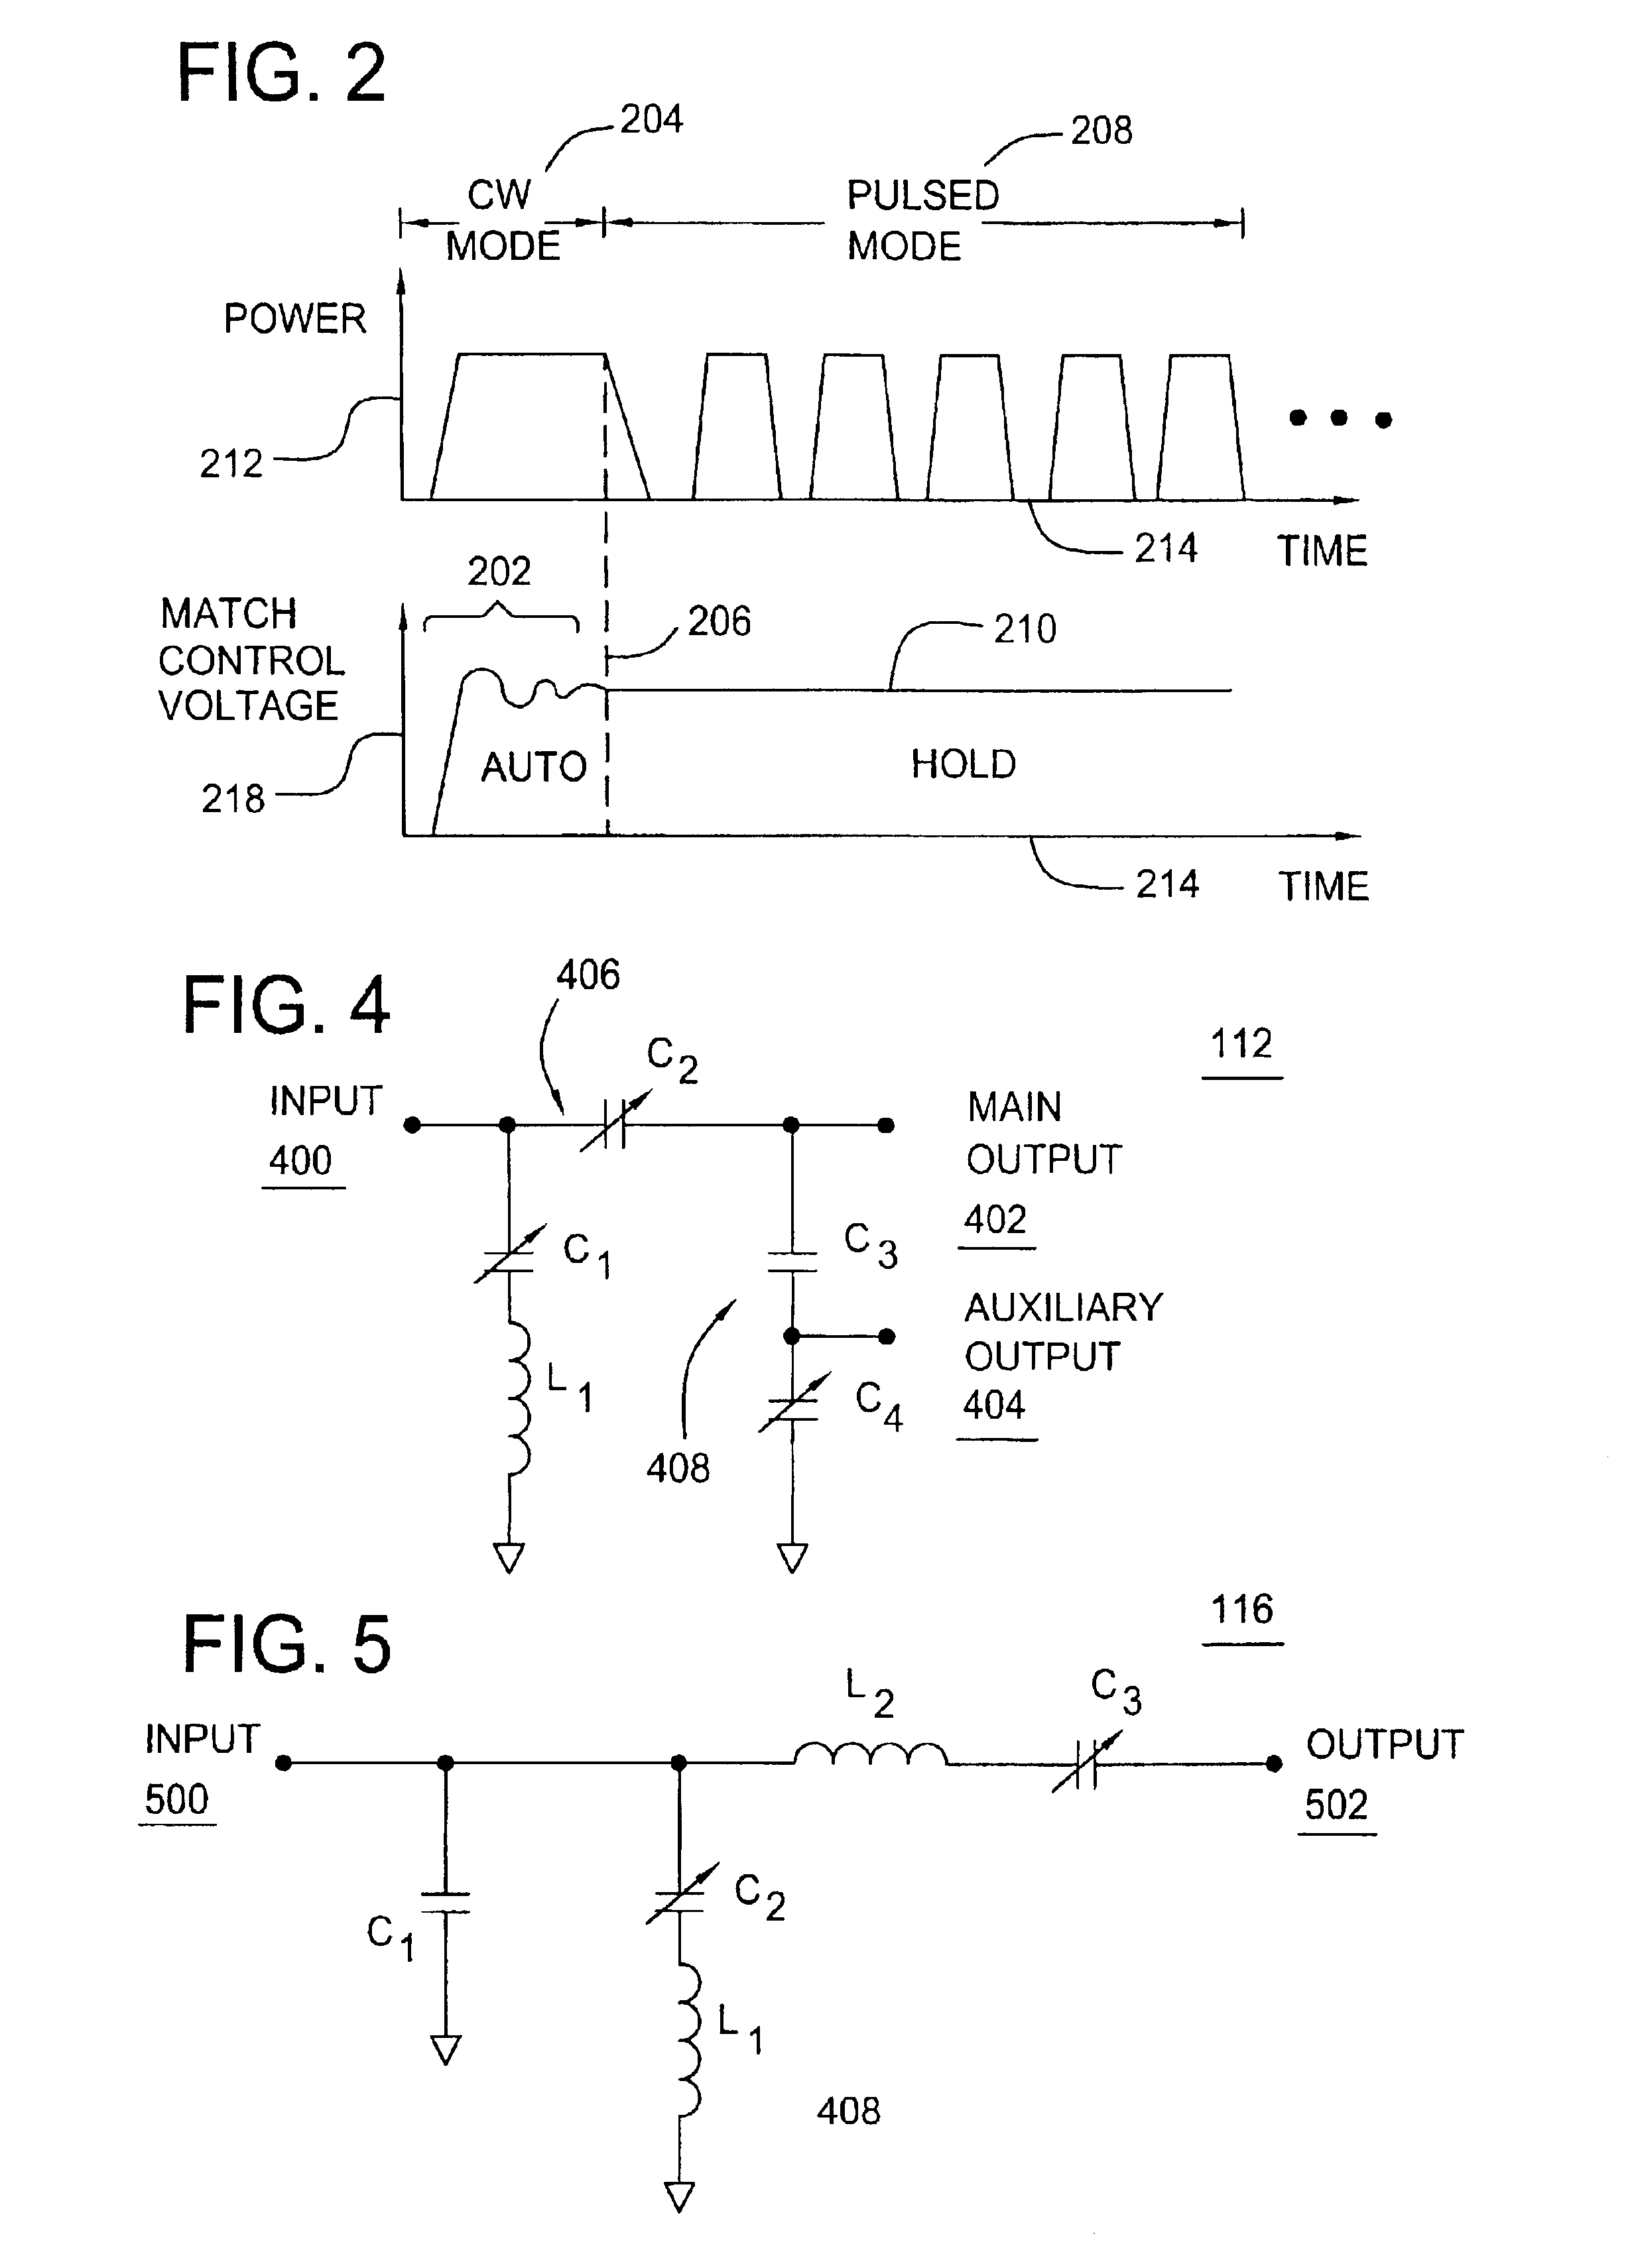 Method and apparatus for tuning an RF matching network in a plasma enhanced semiconductor wafer processing system